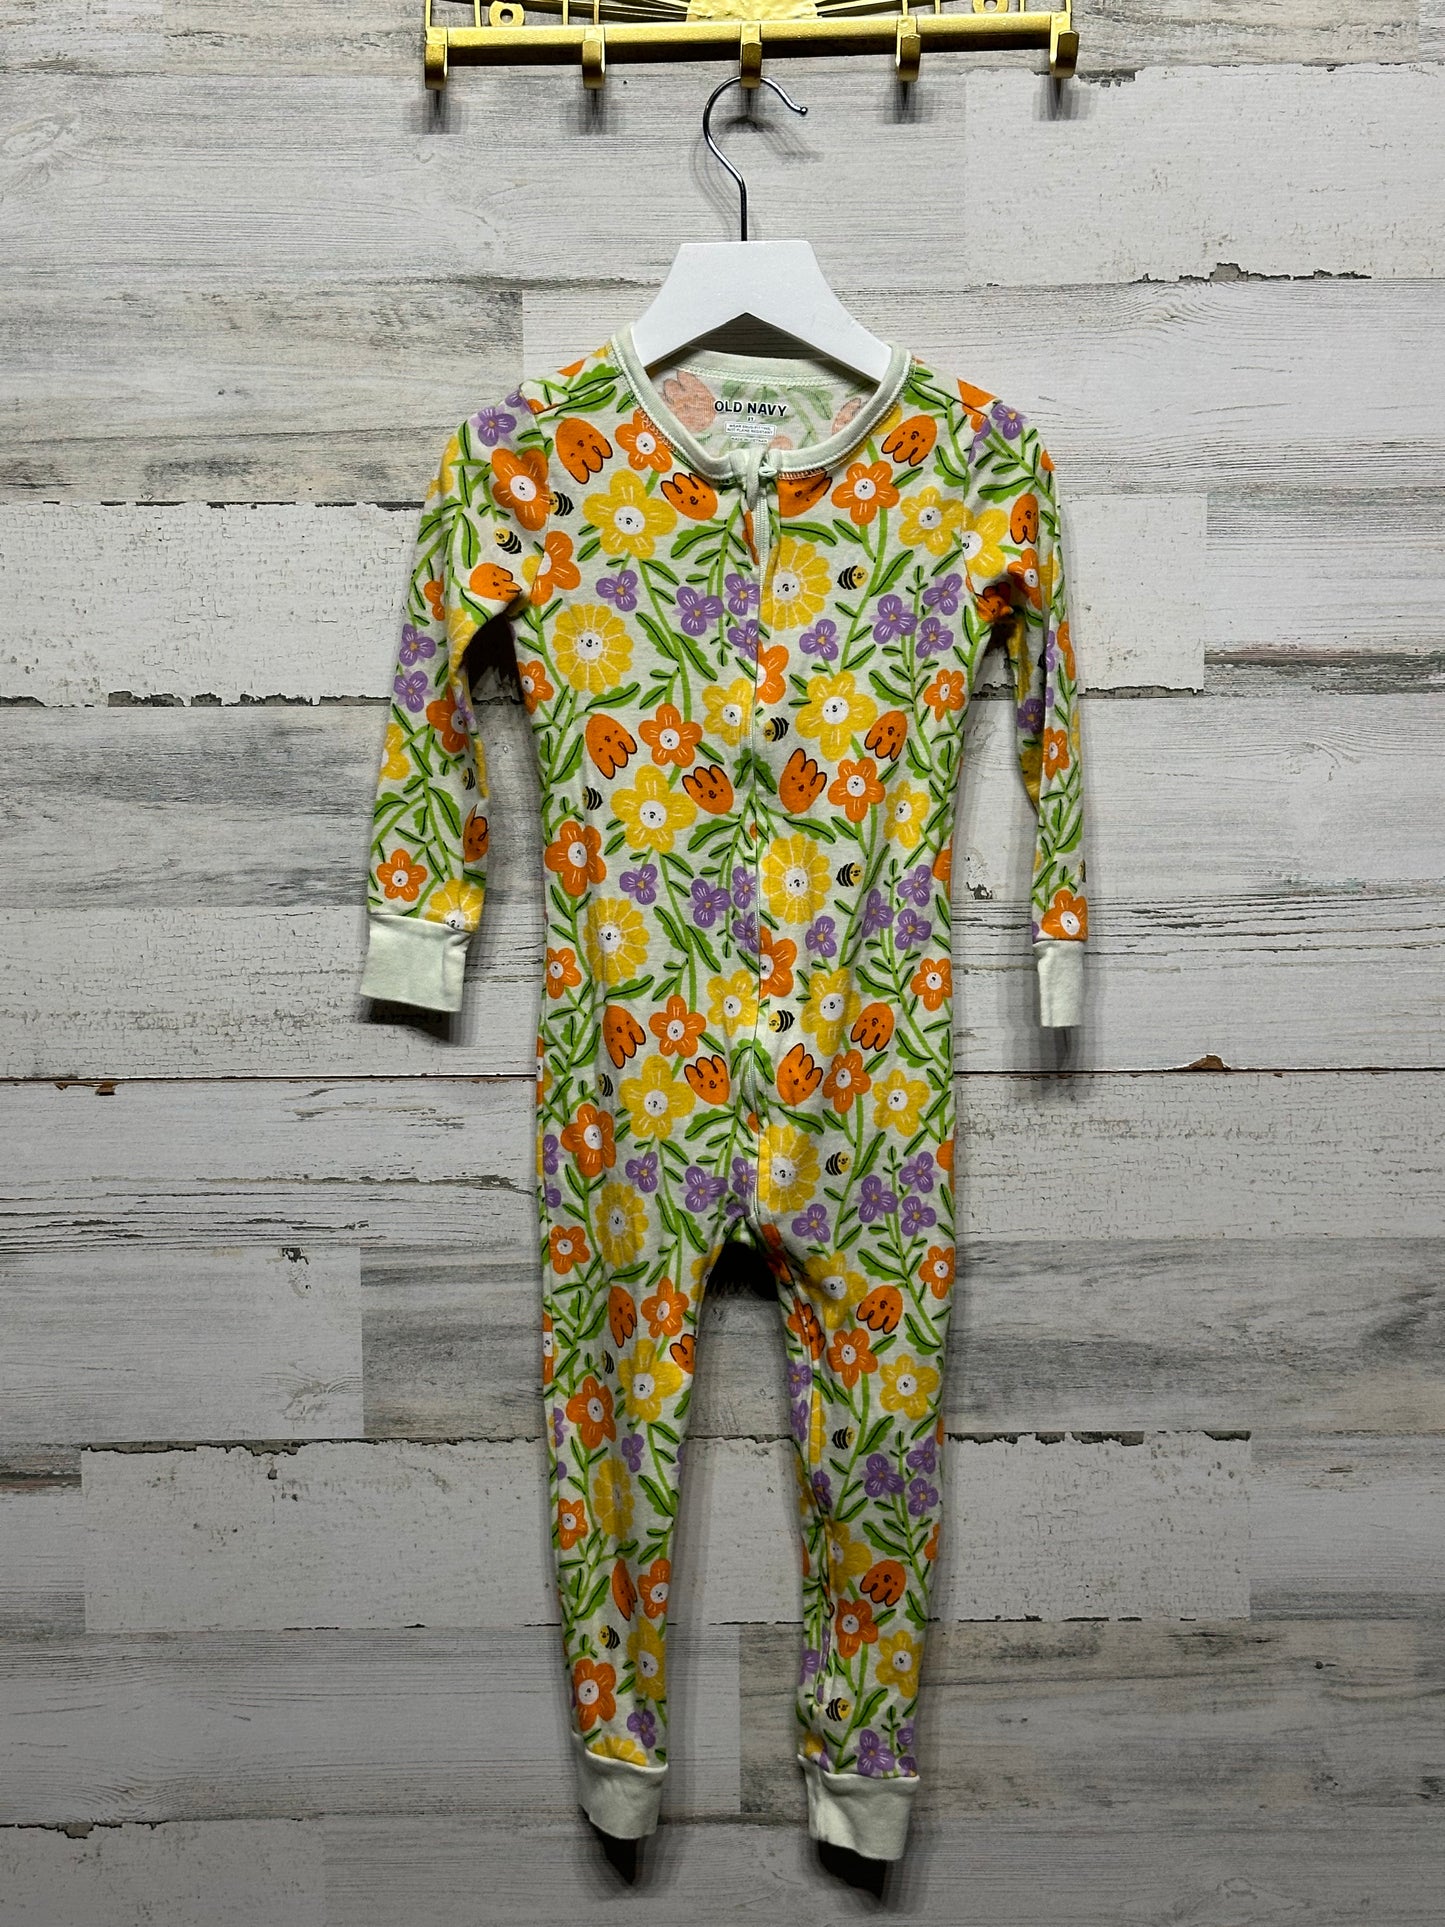 Girls Size 3t Old Navy Floral Zip Coverall - Good Used Condition